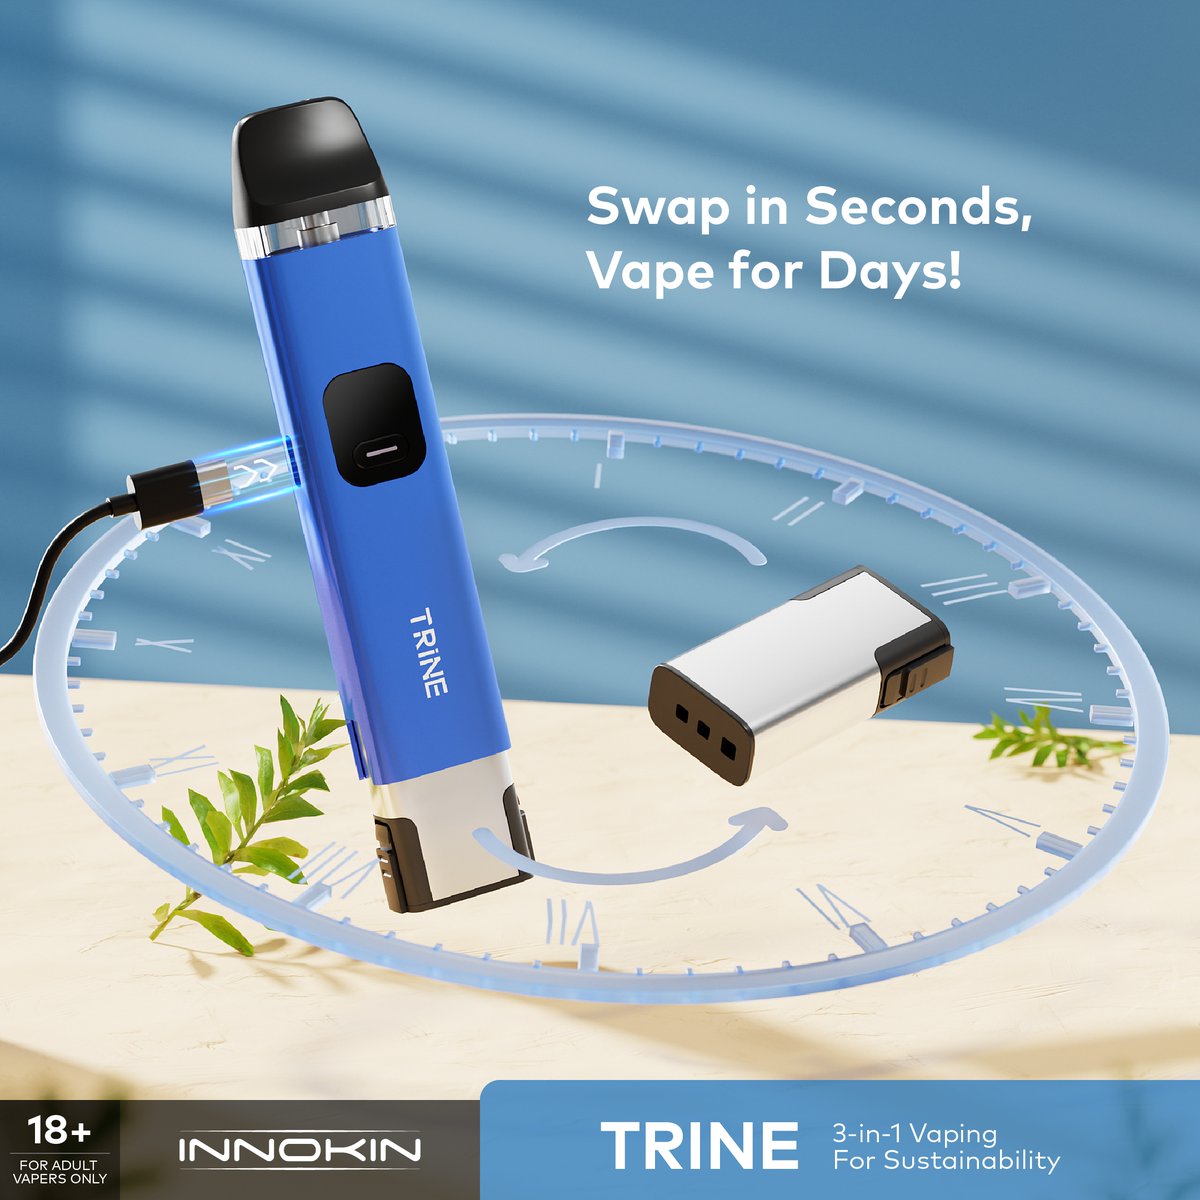 Stuck in a battery bind? ⚡️ Tell us, when do you need that spare battery boost?

🔋 With TRINE, just swap batteries in seconds and keep the clouds rolling! ☁️ 

18/21+ only
#Vaping #Vapelife #Innokin  #TRINE #InnokinTrine #3in1vaping #GreenVaping #Sustainability